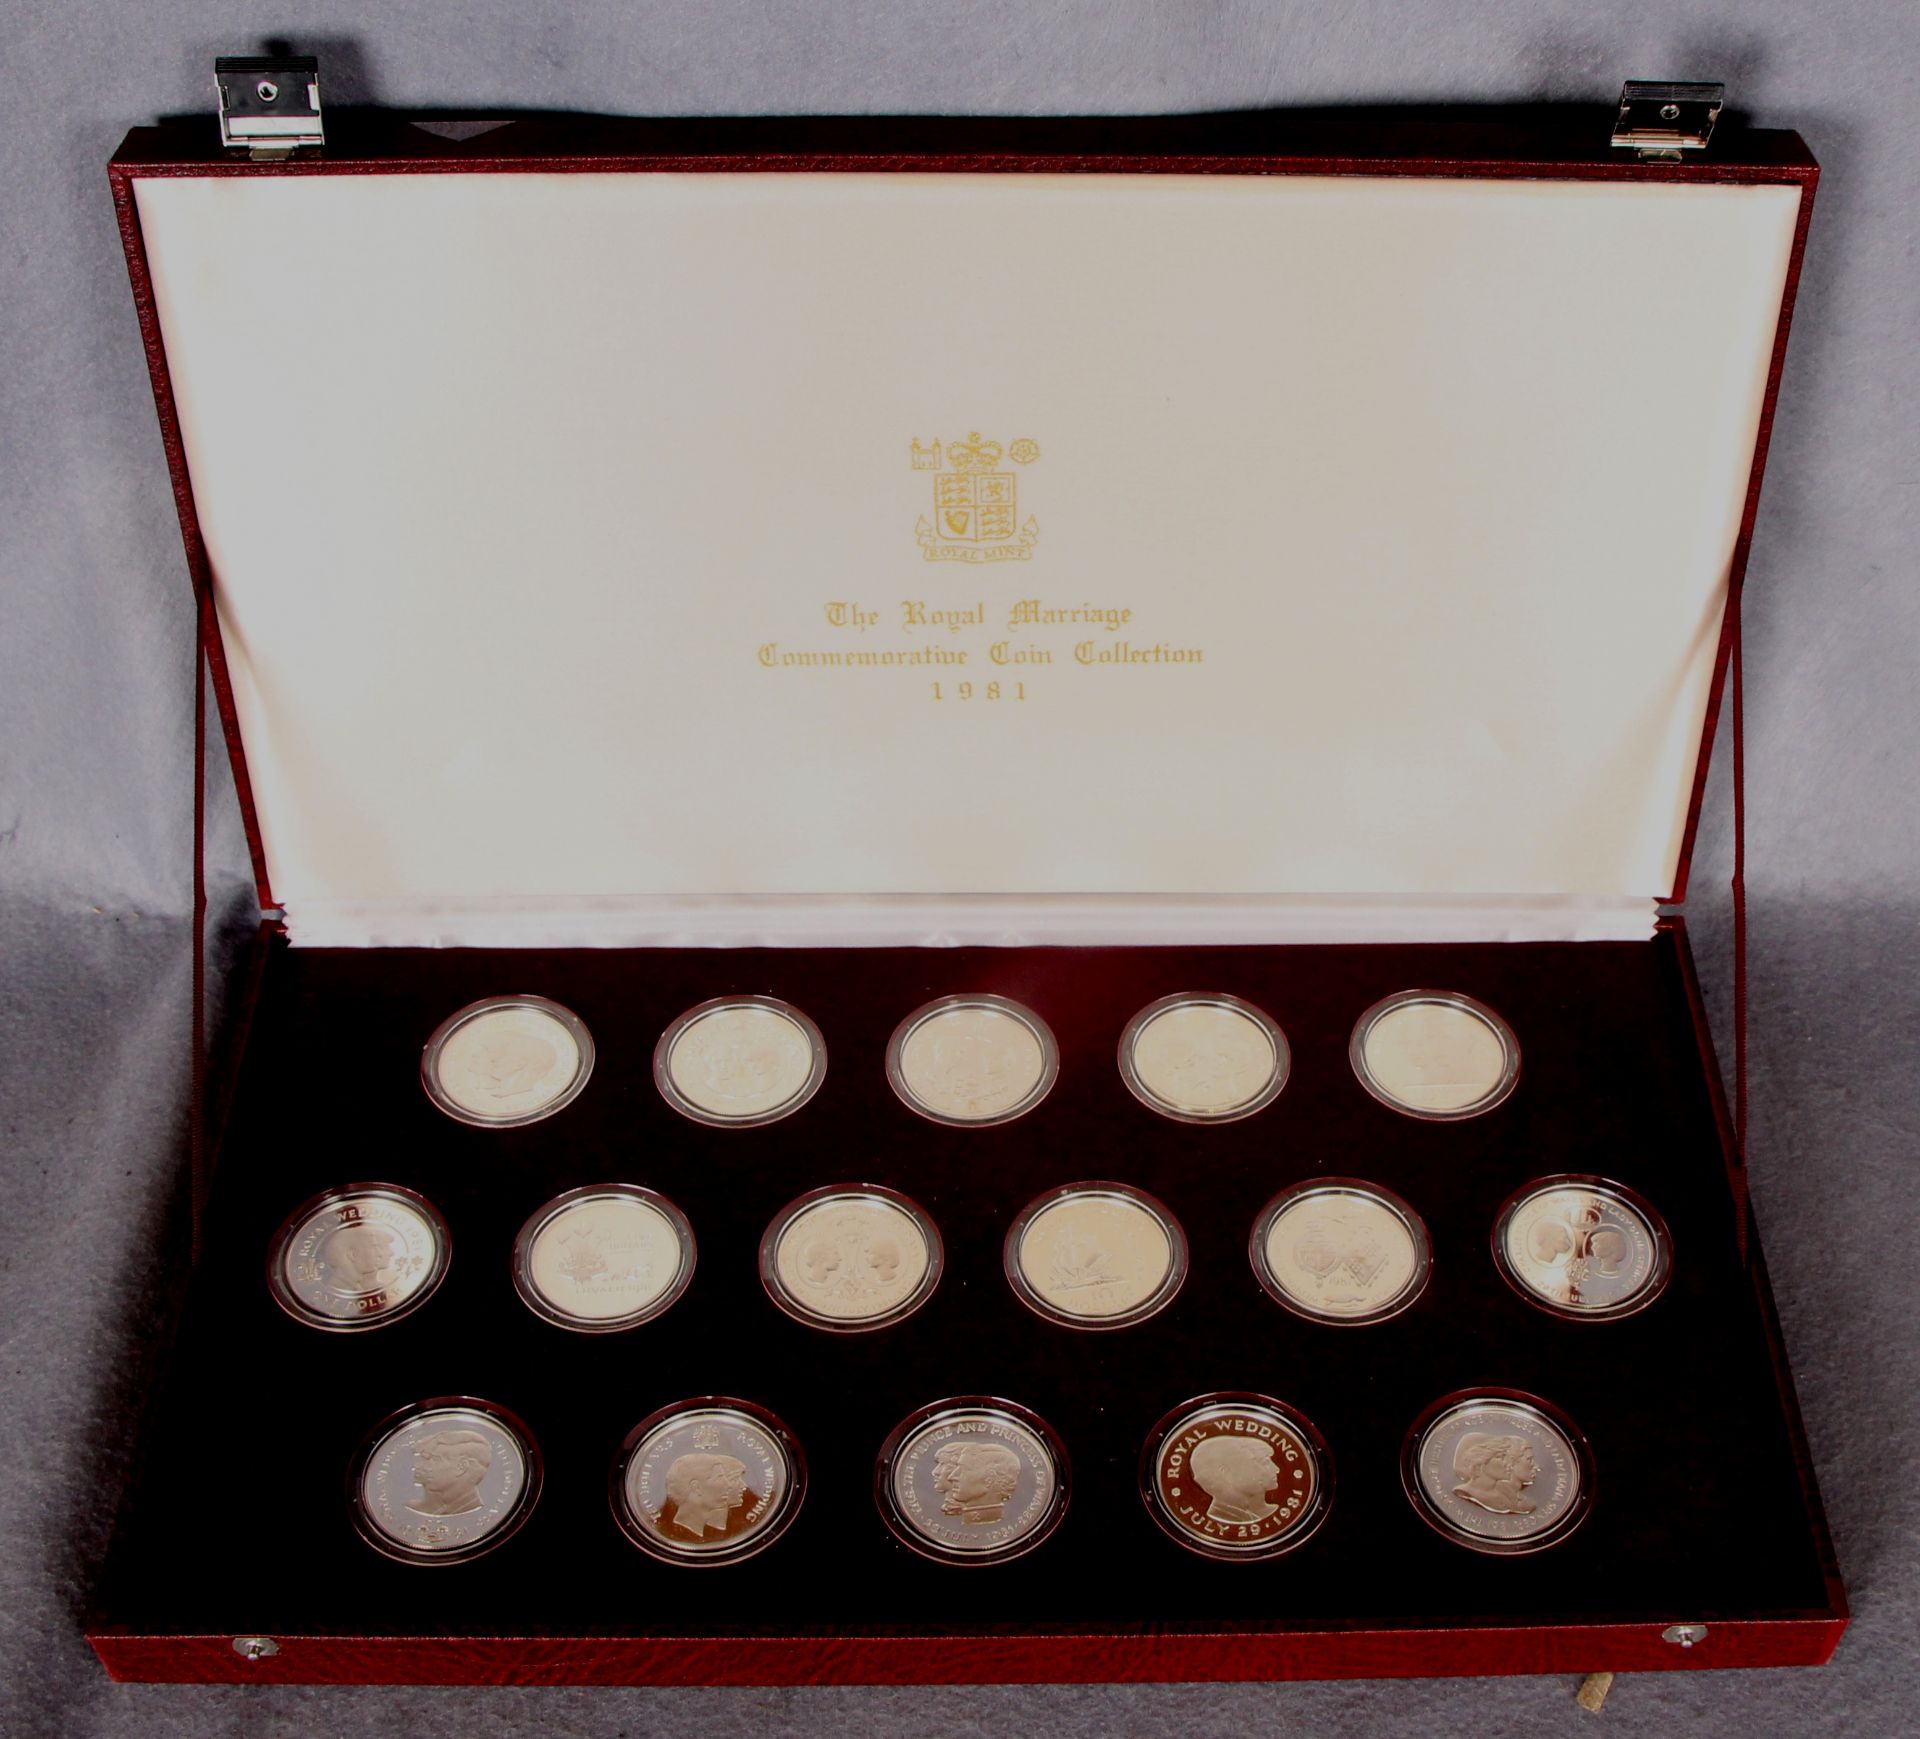 Royal Marriage 1981 of Prince Charles and Lady Diana 16 sterling silver coin collection in original